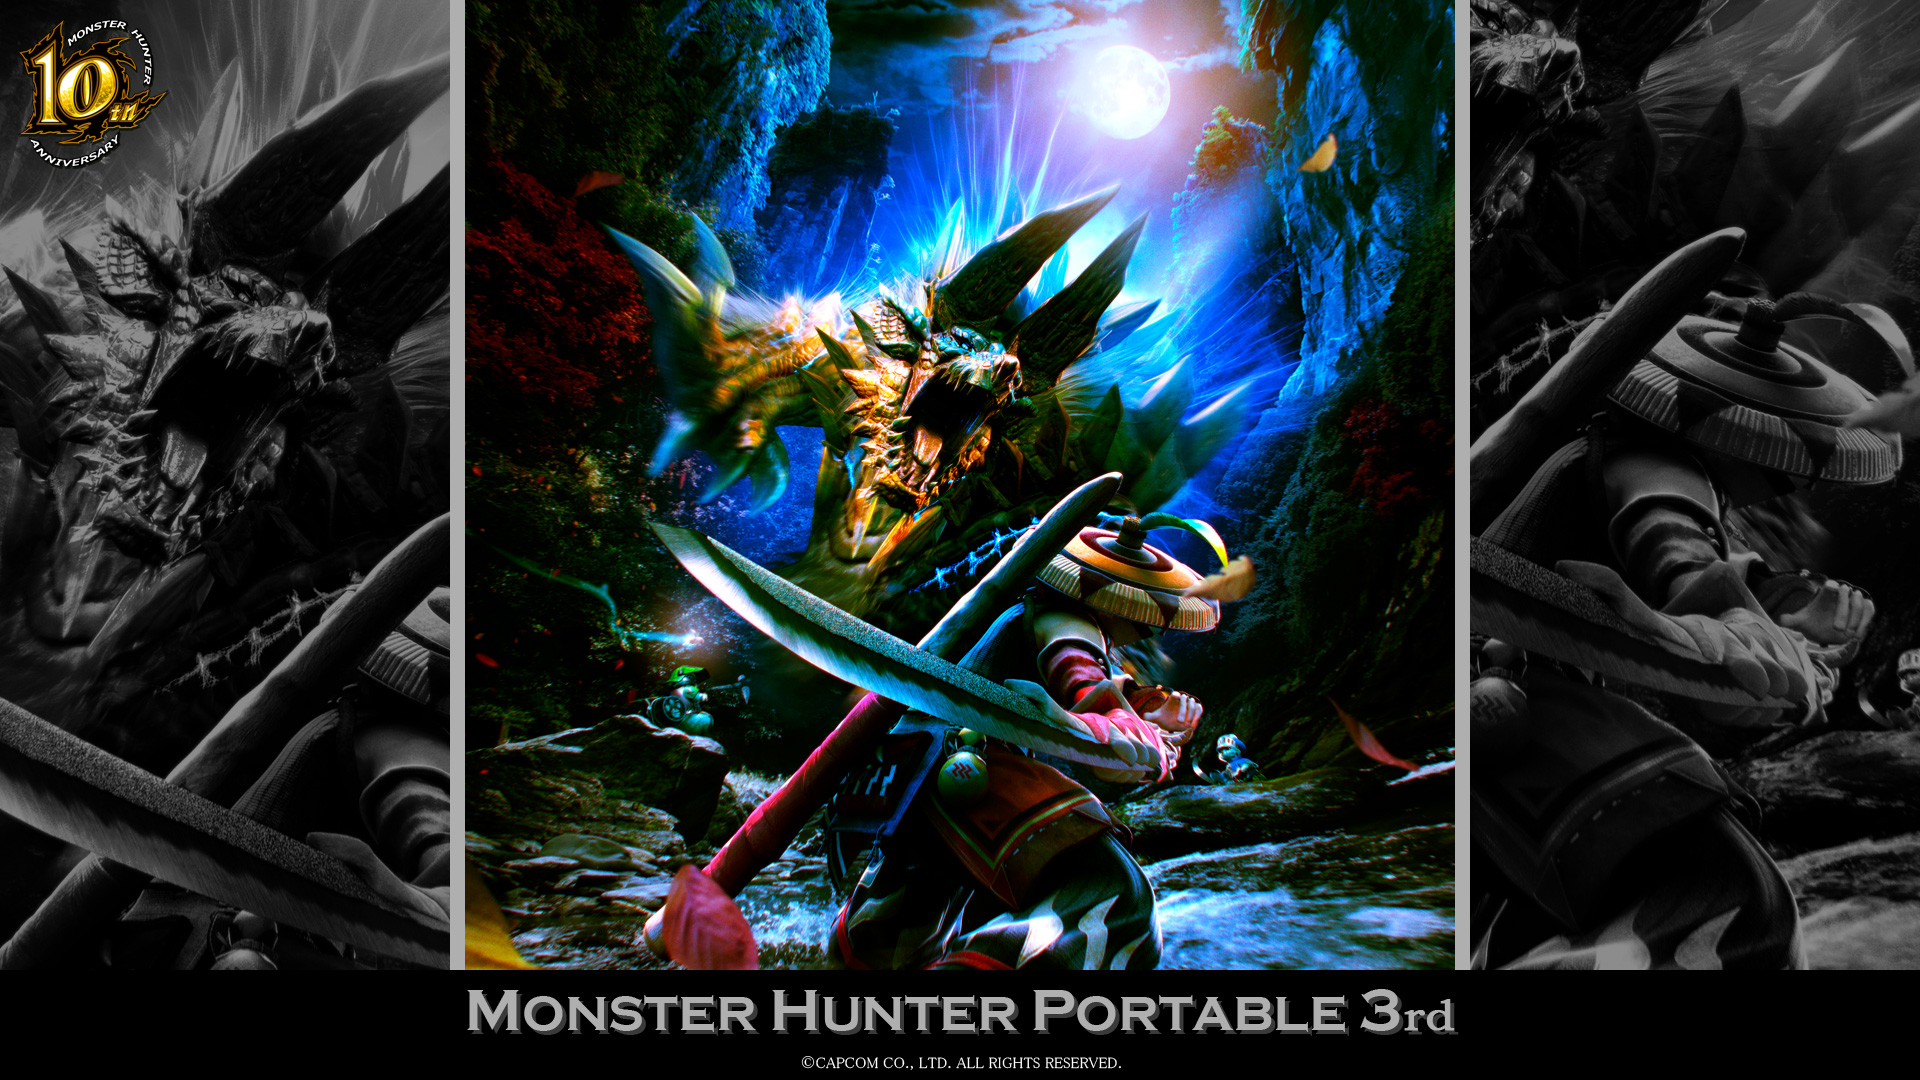 Amazing Monster Hunter Portable 3rd Pictures & Backgrounds